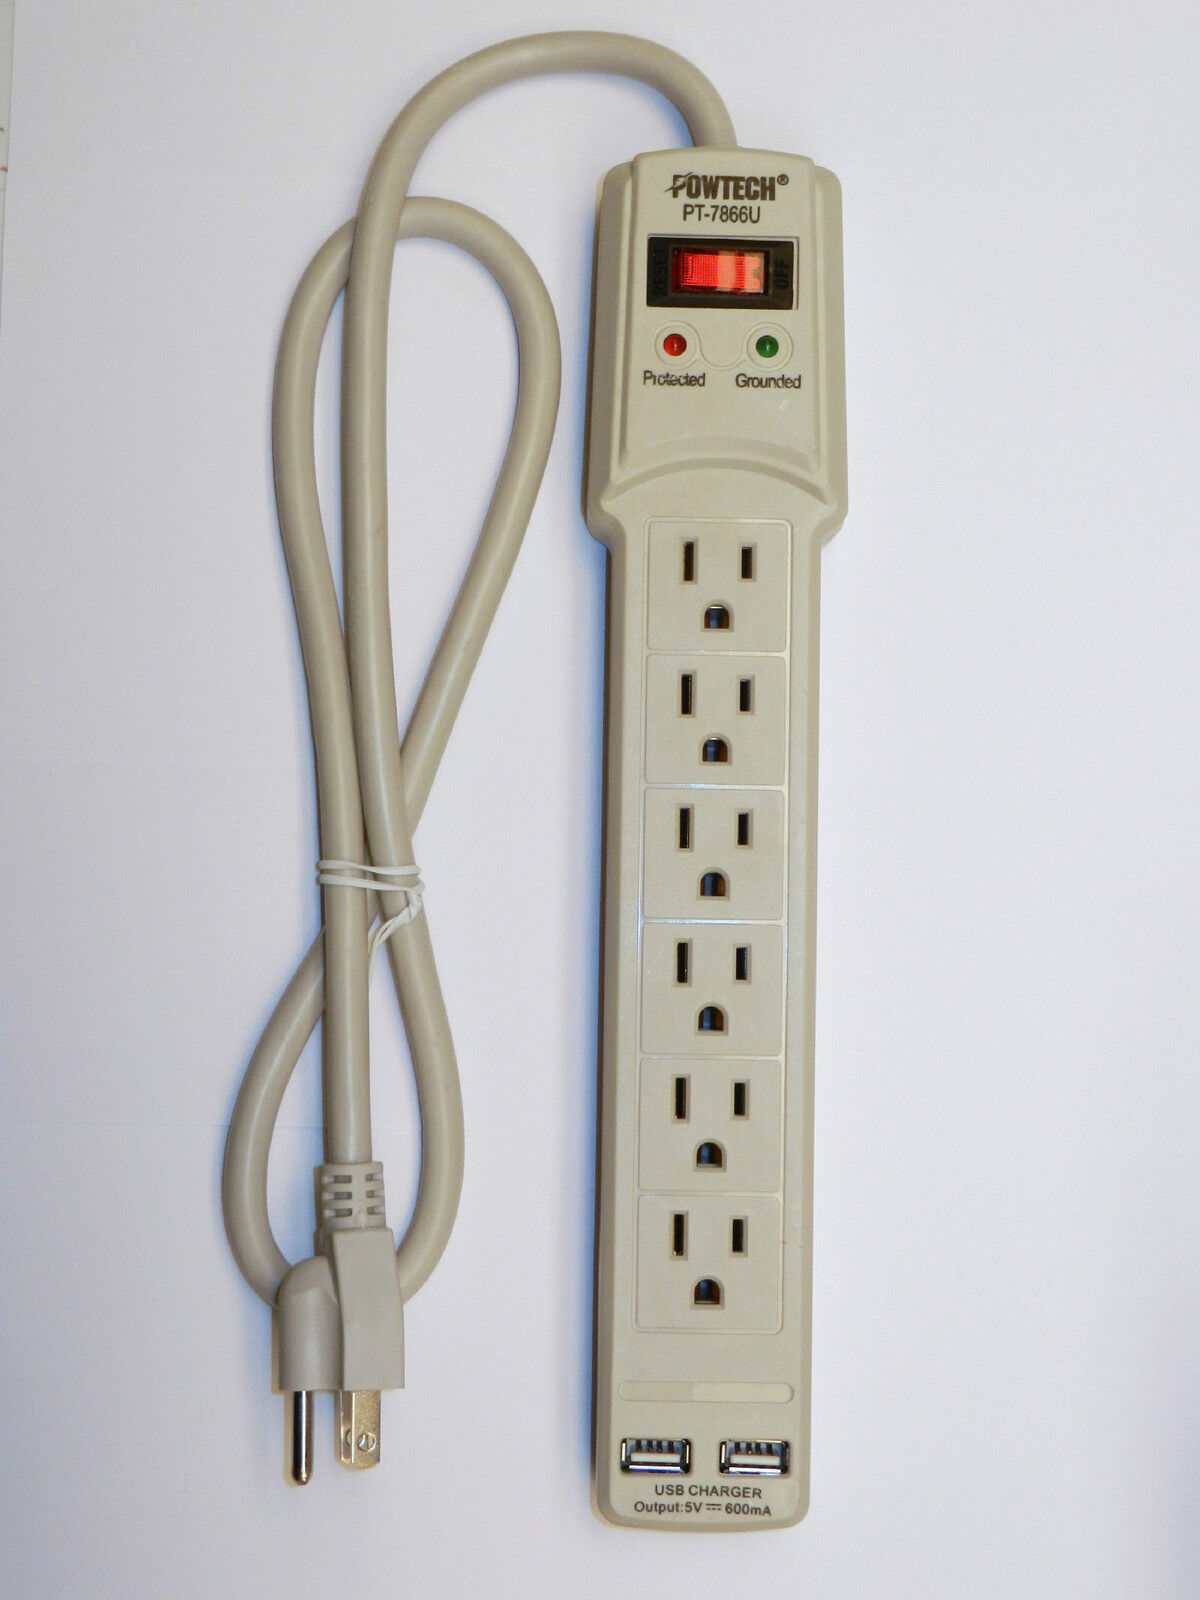 6 Outlets Power Strip Surge Protector Safety Reset Circuit Breaker 2 USB Ports 